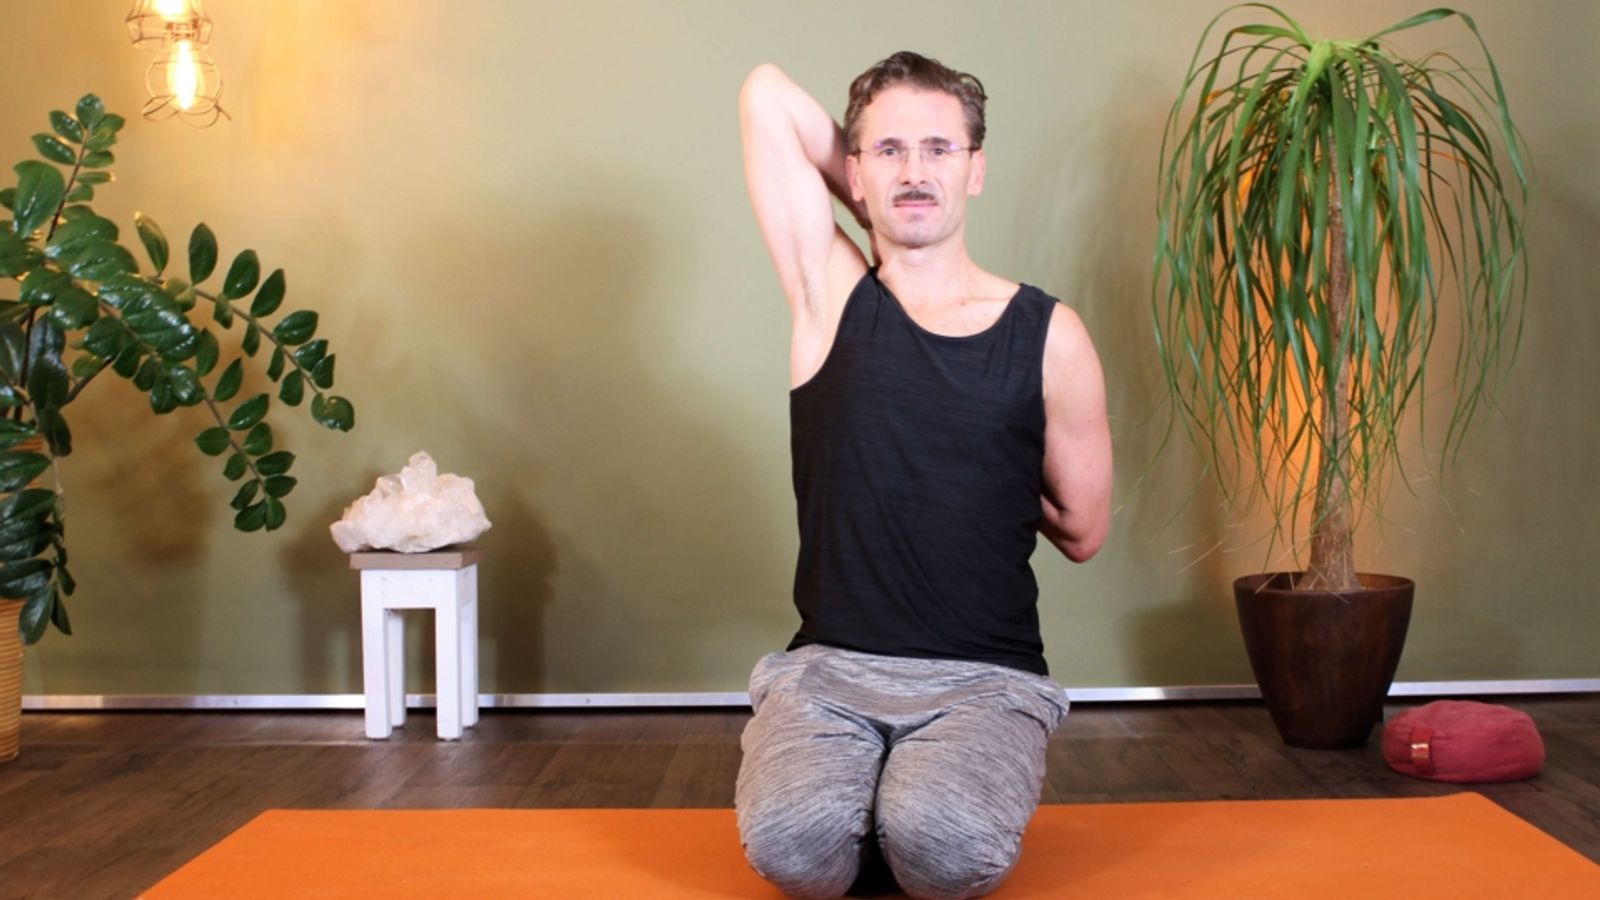 Full class - Posture matters, relieve pain with the correct posture in the exercises